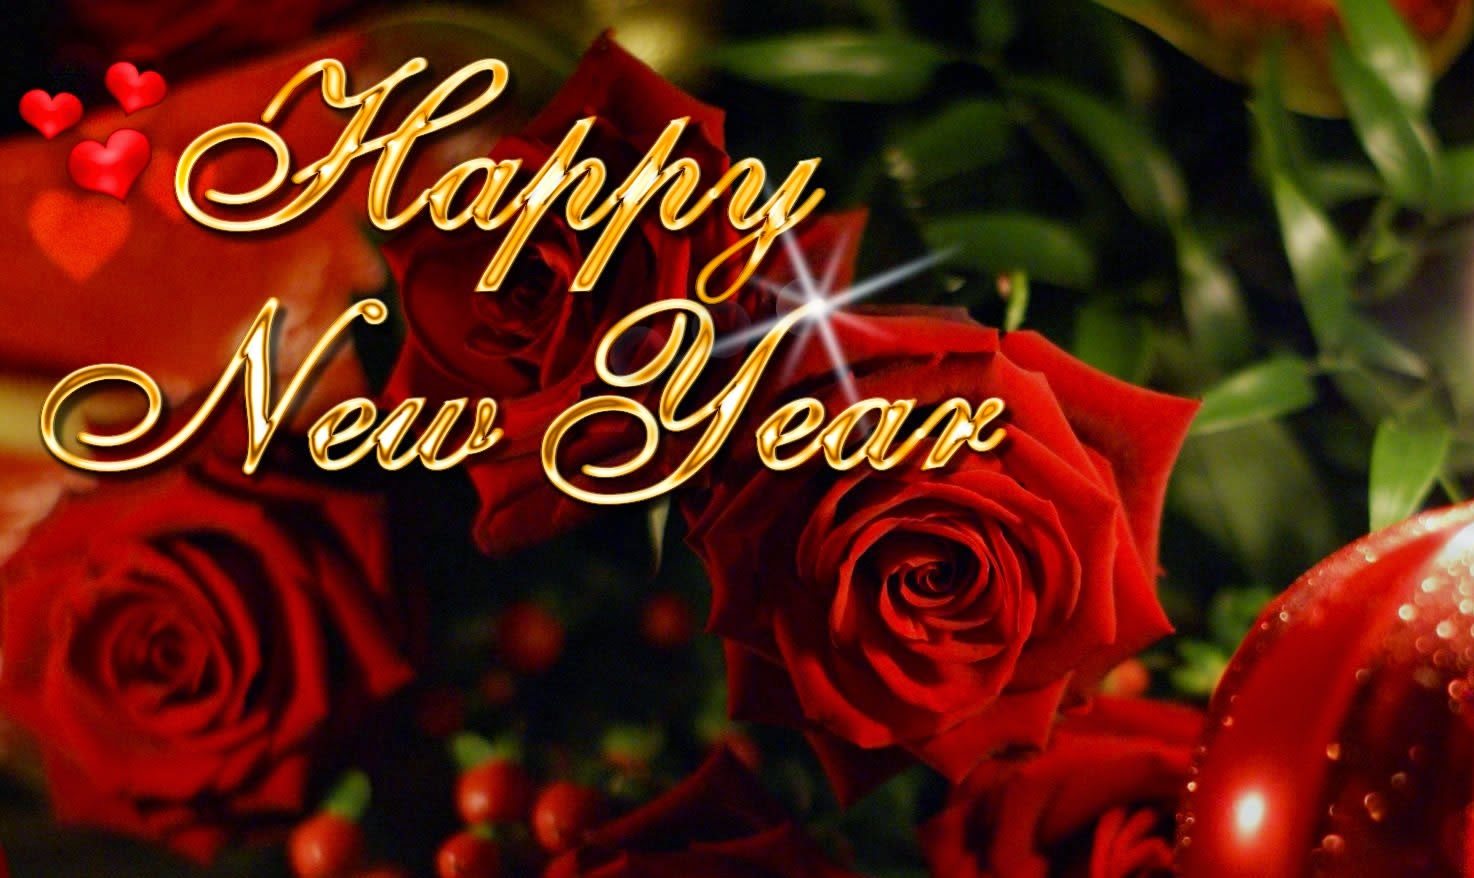 Happy New Year Wish In Red Flower - Happy Valentines Day Roses - 1474x878  Wallpaper 